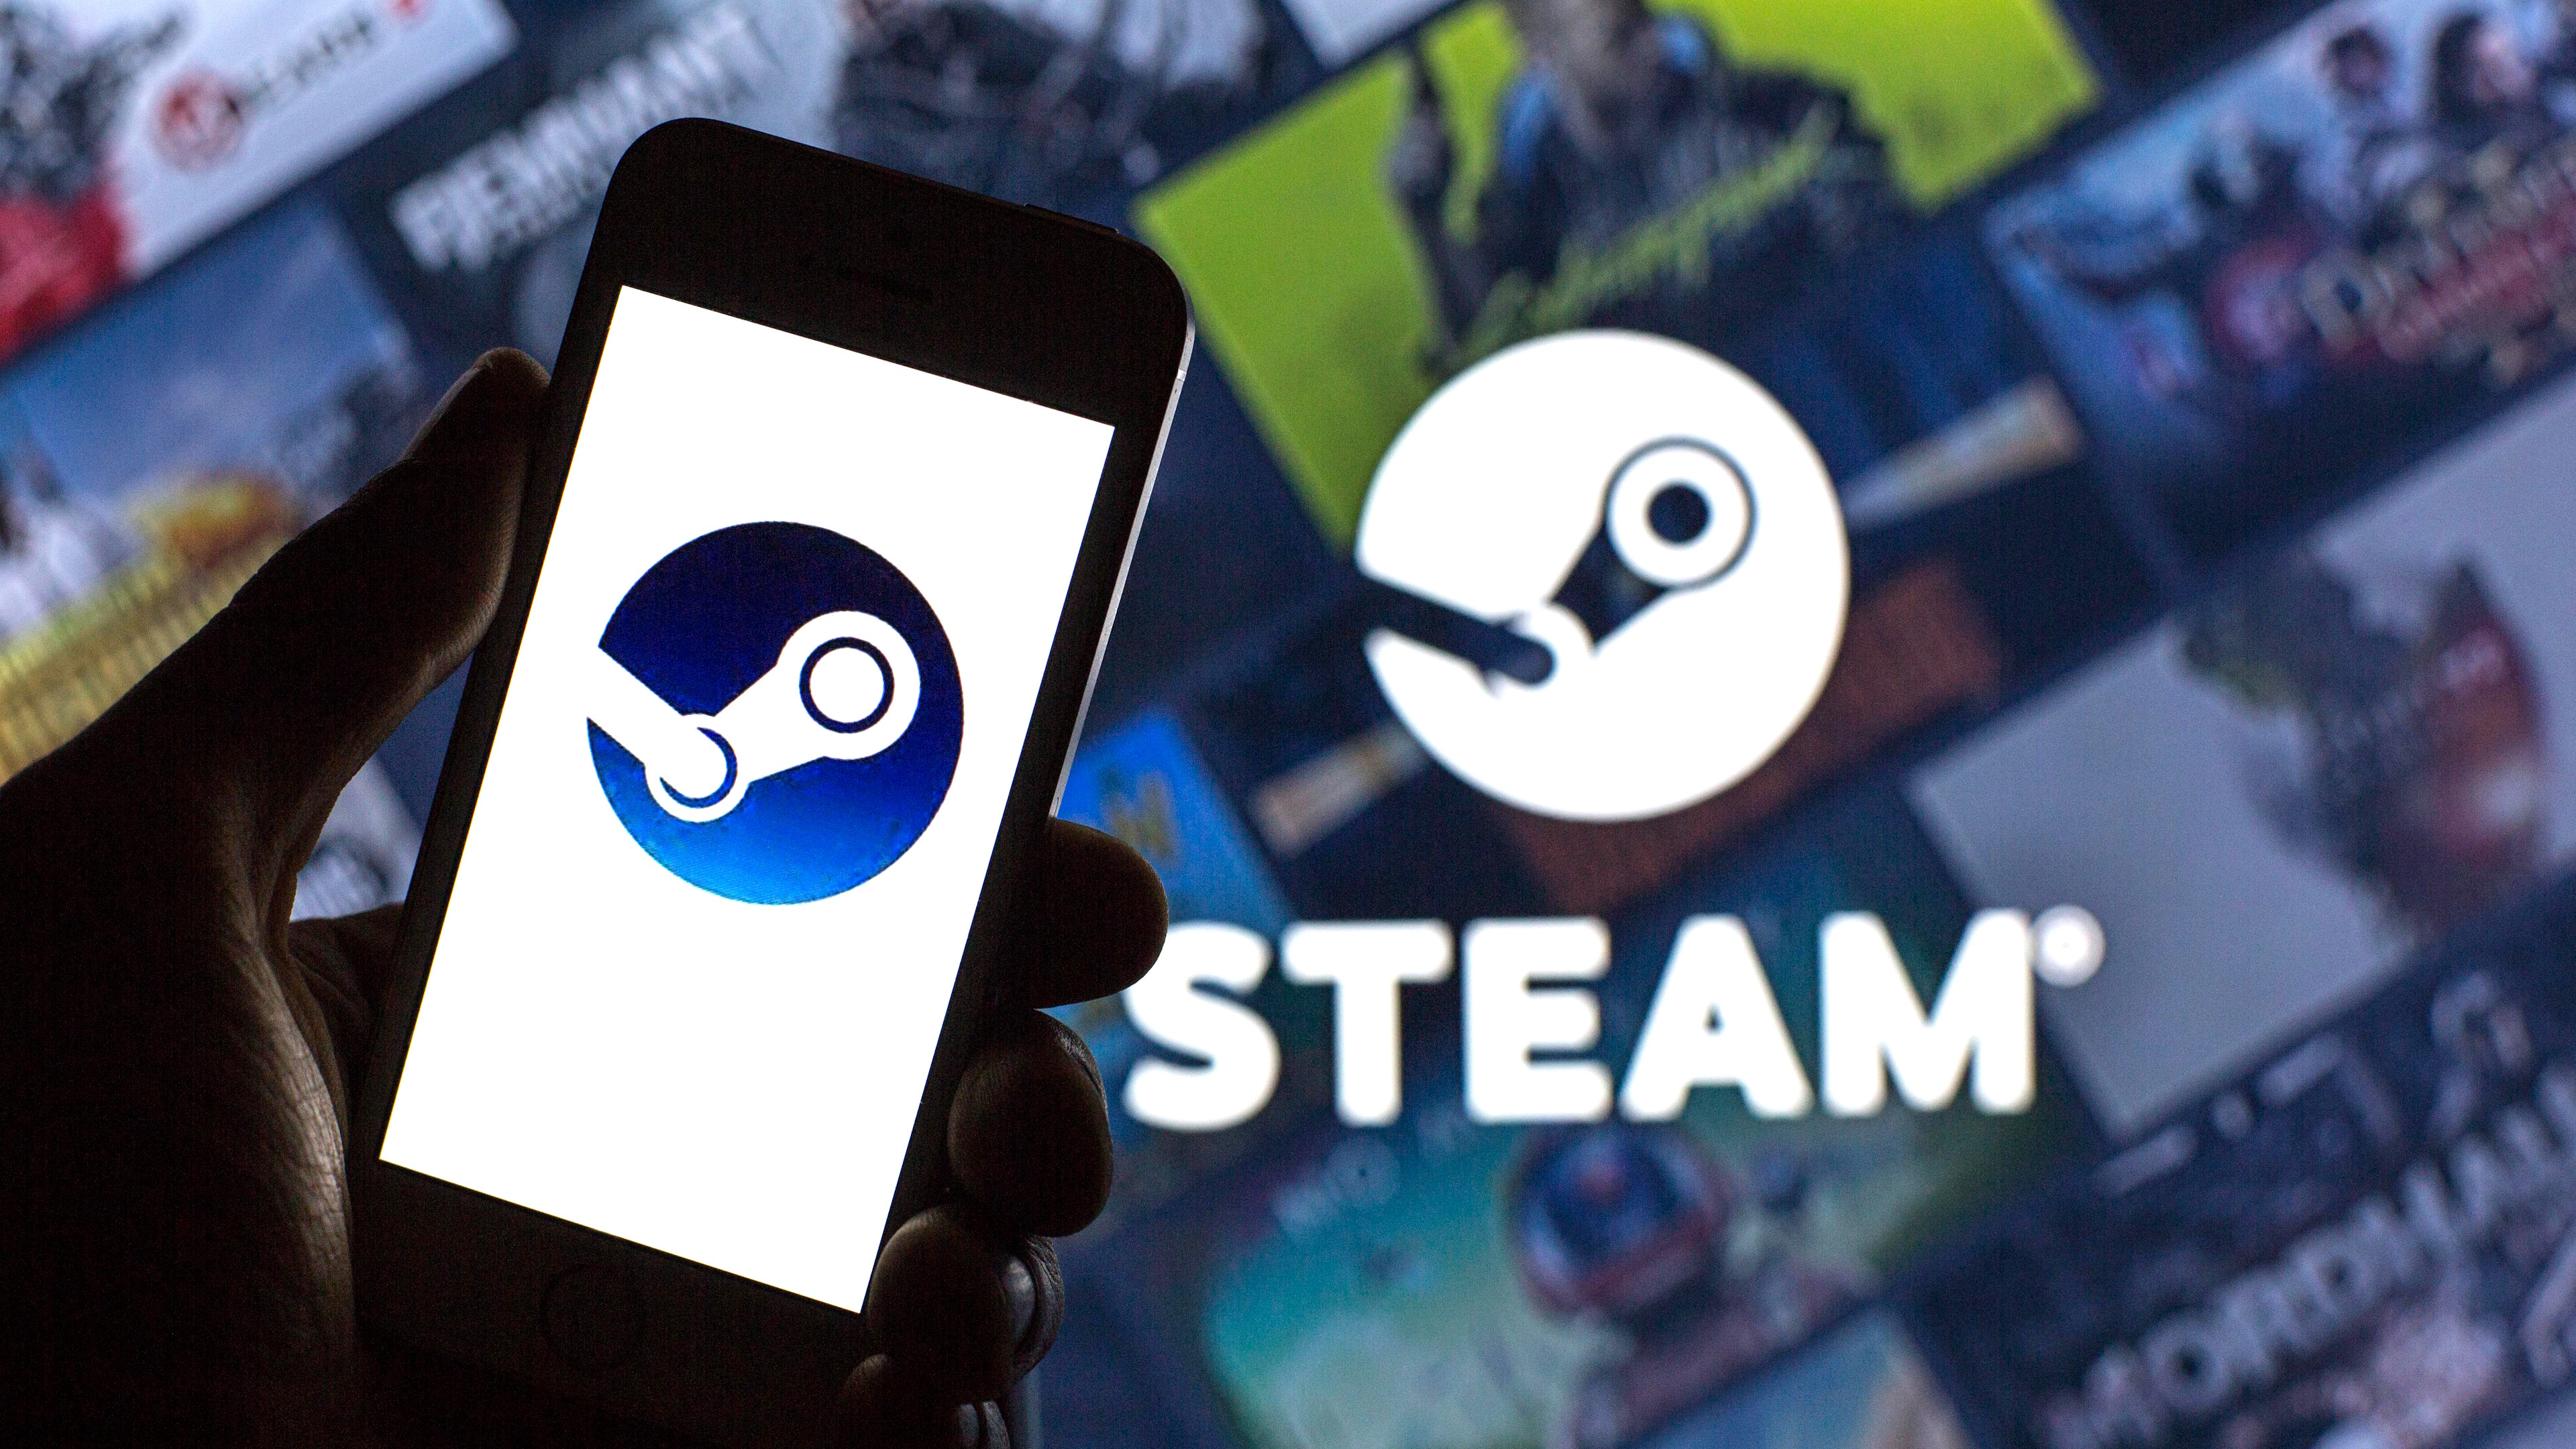 Buy Games Much Cheaper: How to Use Steam Argentina or Turkey to Buy Games  at Lower Prices